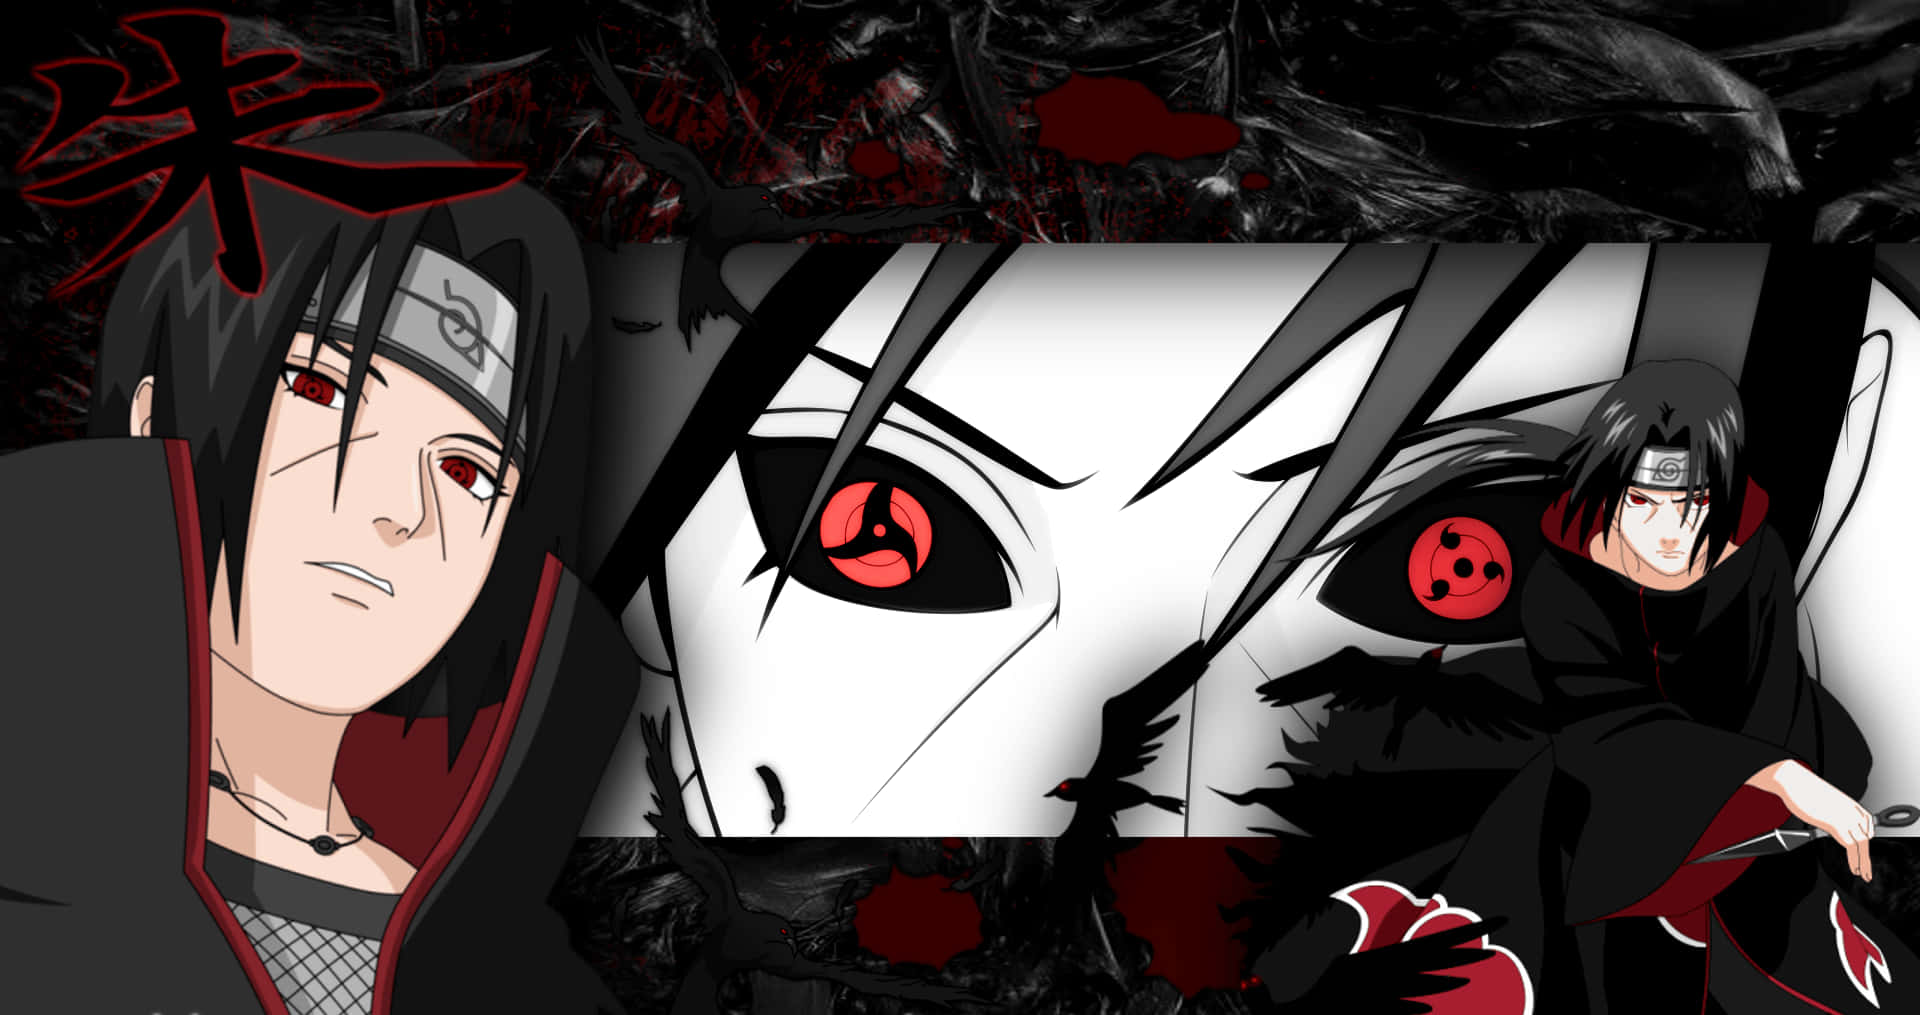 Close Up View Of Itachi Aesthetic Sharingan Eyes With Black Crows Wallpaper